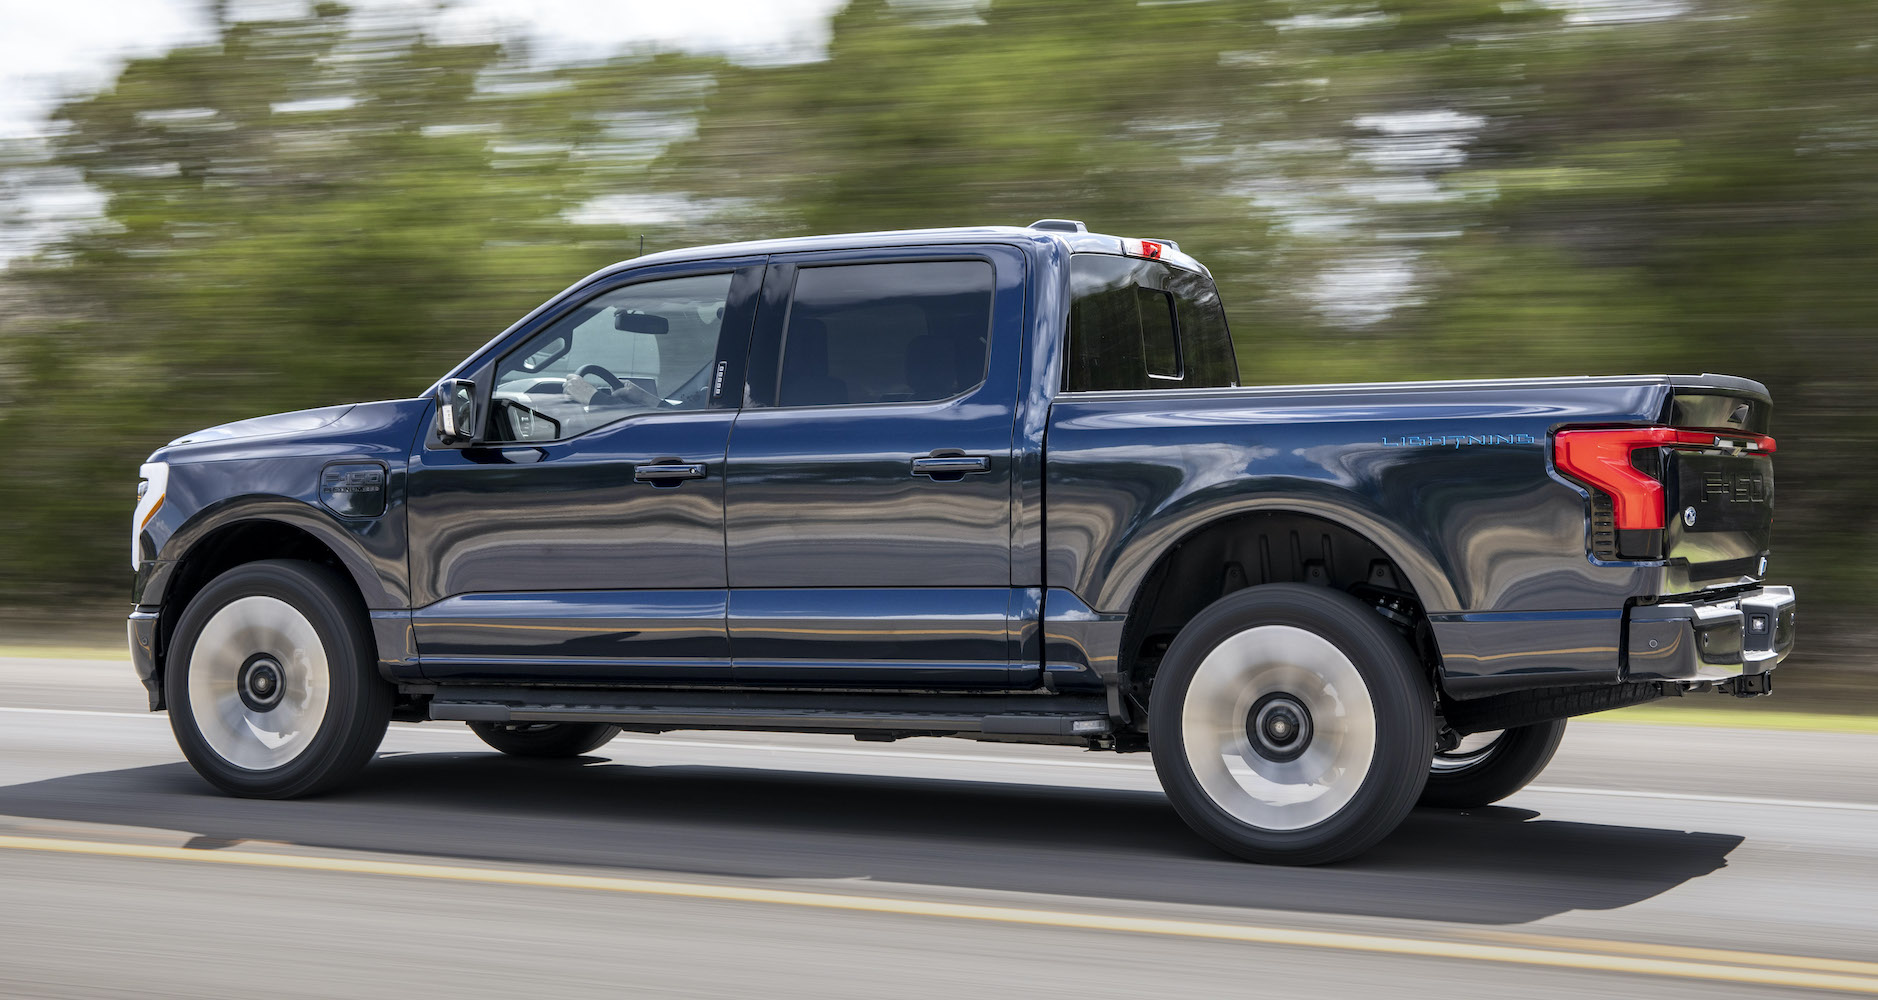 The Ford F-150 Lightning Platinum, the top trim model of the electric pickup truck, driving down the road. Here's our review.